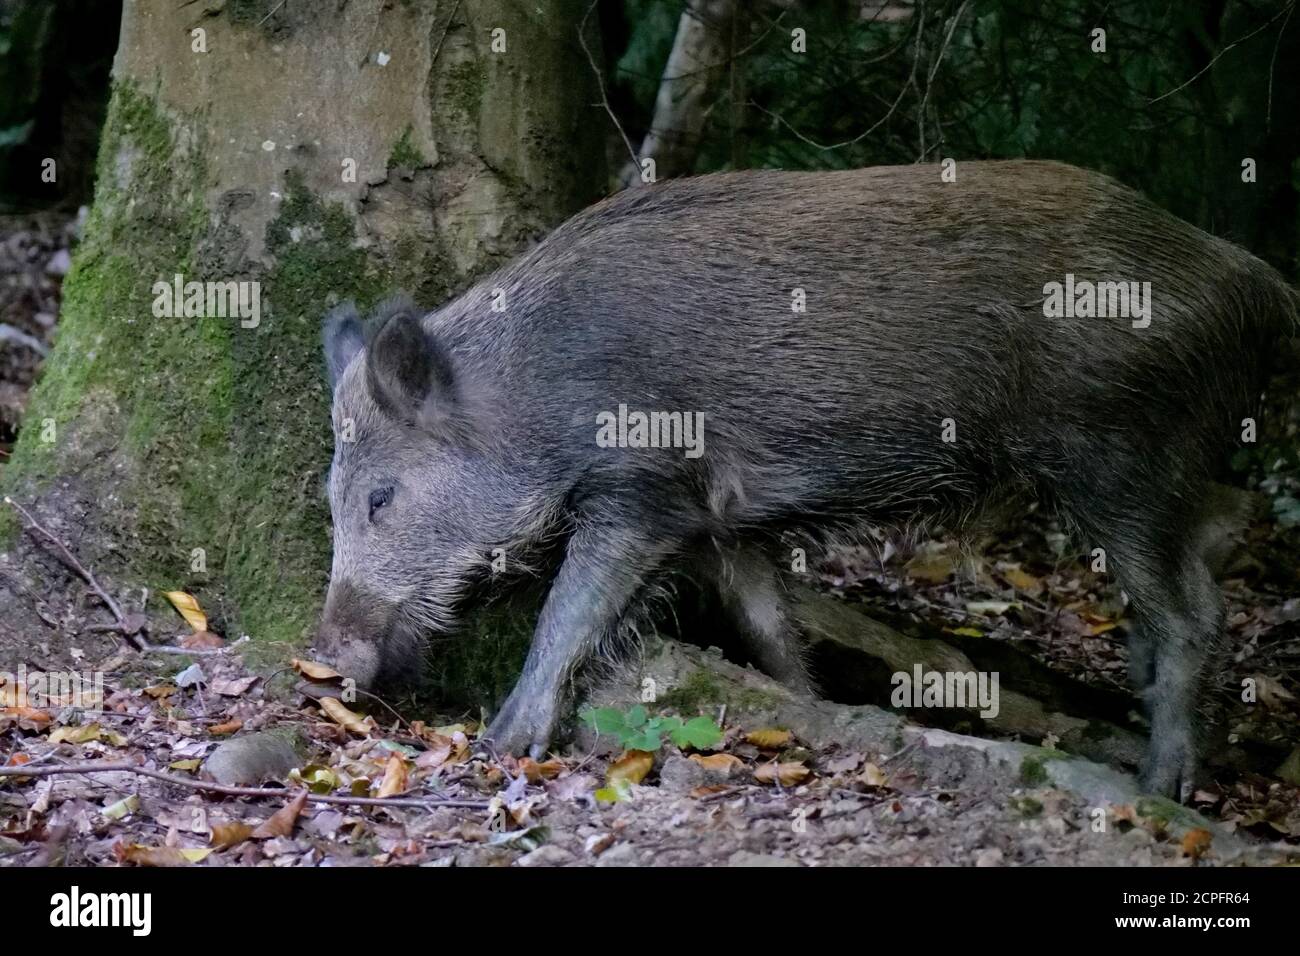 A wild boar in the Forest of Dean, near Parkend, Gloucestershire. The boar population in the forest is the largest in England. Photo by Andrew Higgins Stock Photo